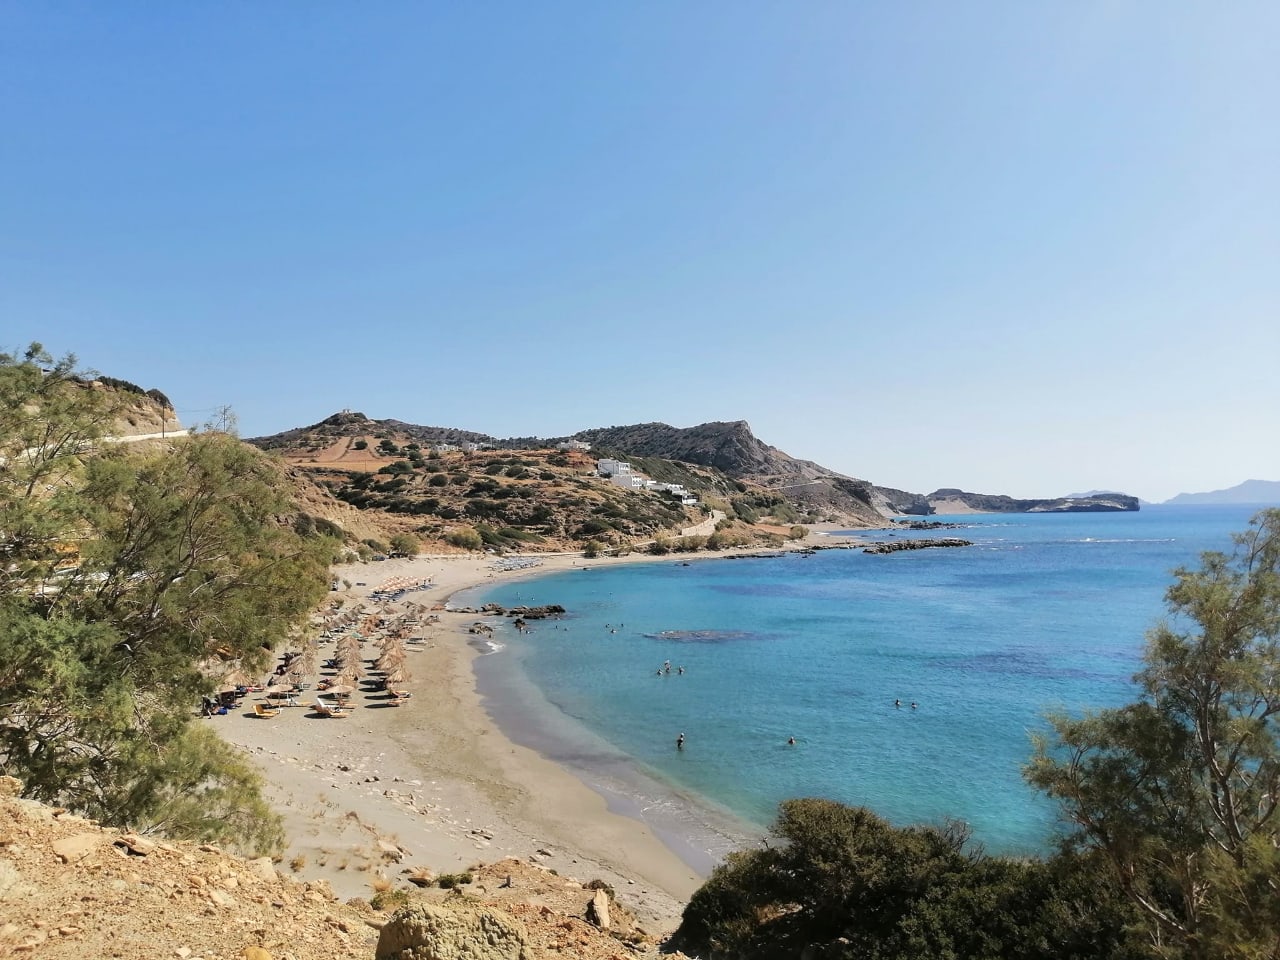 private tour south rethimno, beaches of south rethimno, best tour to discover south rethymno, south rethymno, crete travel, first time crete, the crete you are looking for 